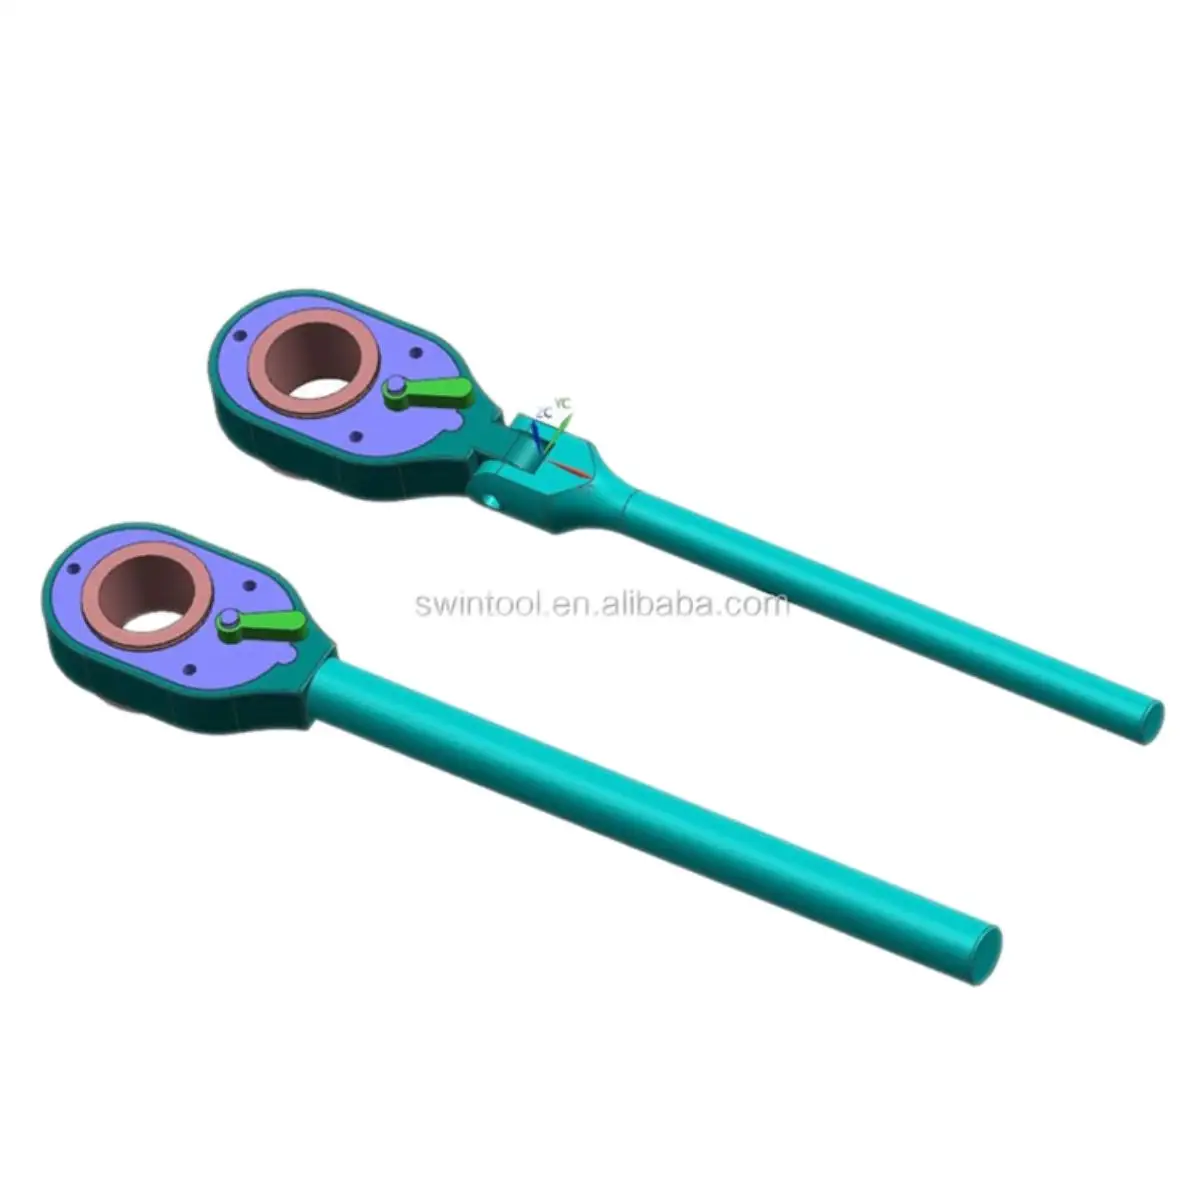 Ratcheting Pipe Ratchet Wheel Wrench With High Quality Standard Made In China